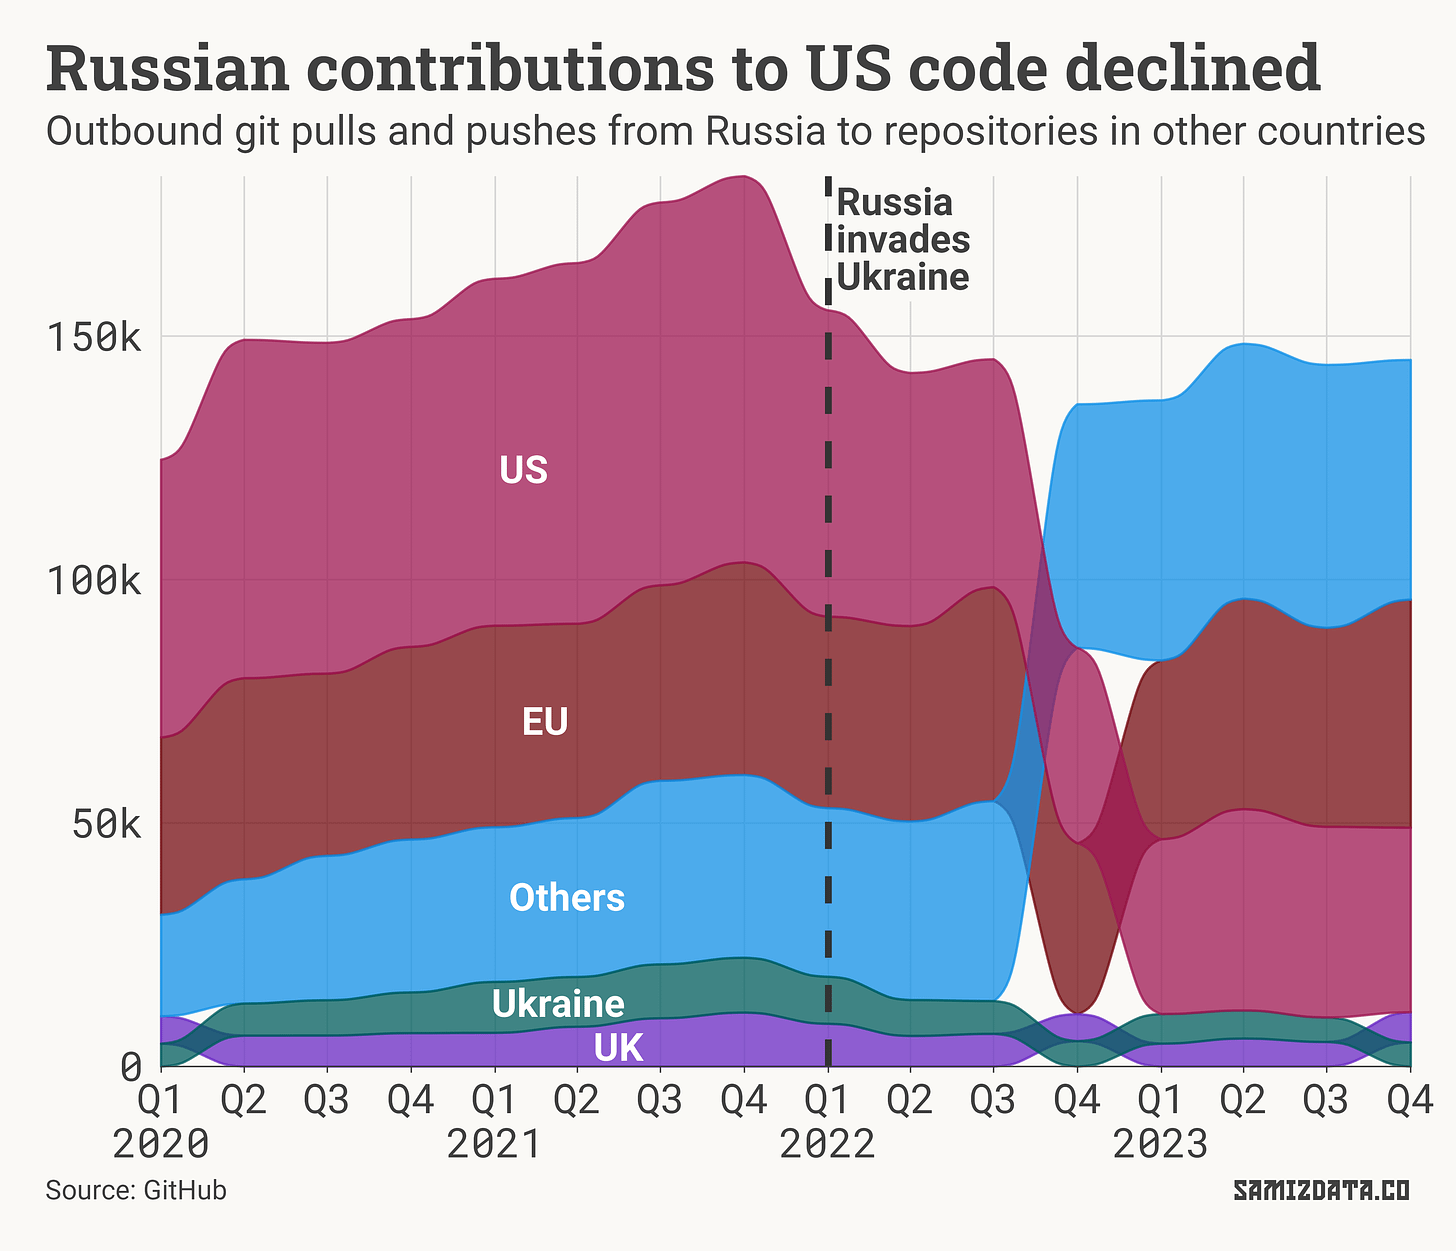 Alluvial chart showing the volume of outbound collaborations from Russia to other economies' code. The volume of collaborations with the US has halved since the invasion of Ukraine. The volume of collaborations with the EU has also decreased, but not as much.